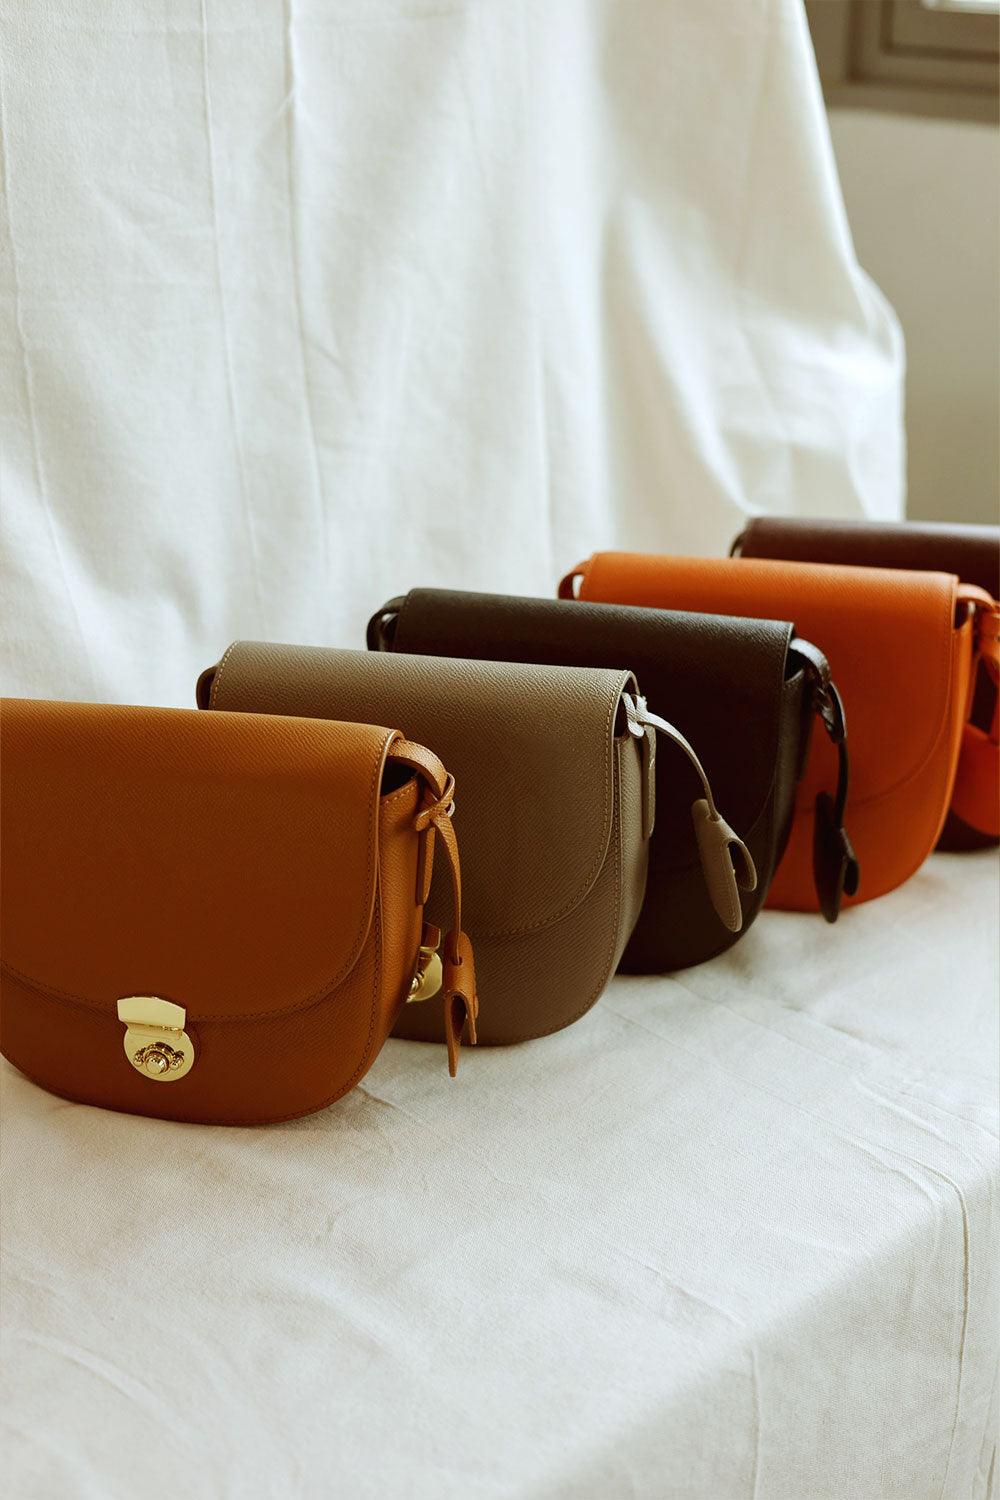 A Closer Look at Our Exquisite Collection of Leather Bags